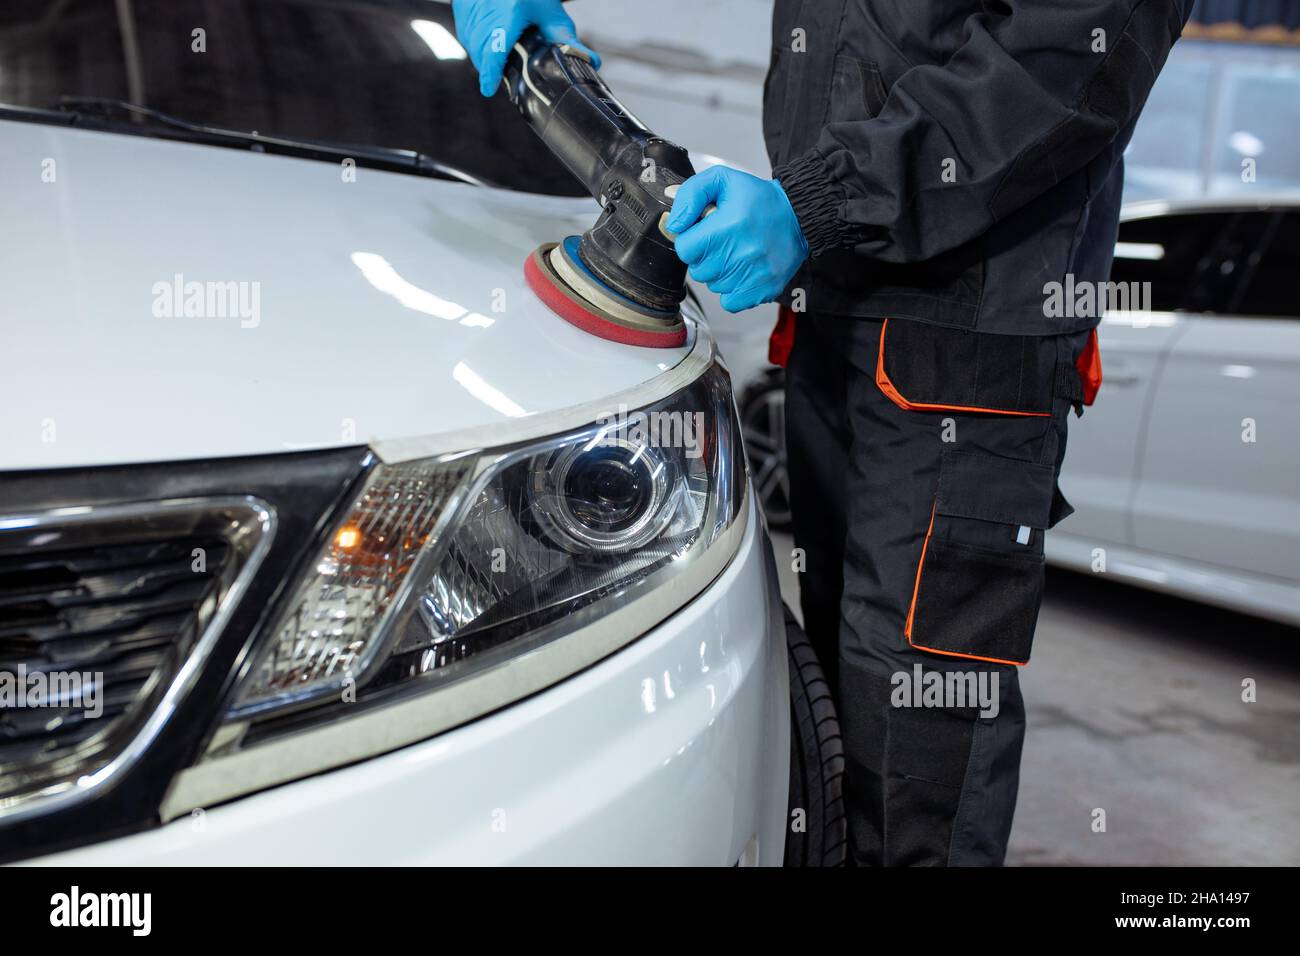 Serviceman polishing car body with machine in a workshop. Stock Photo